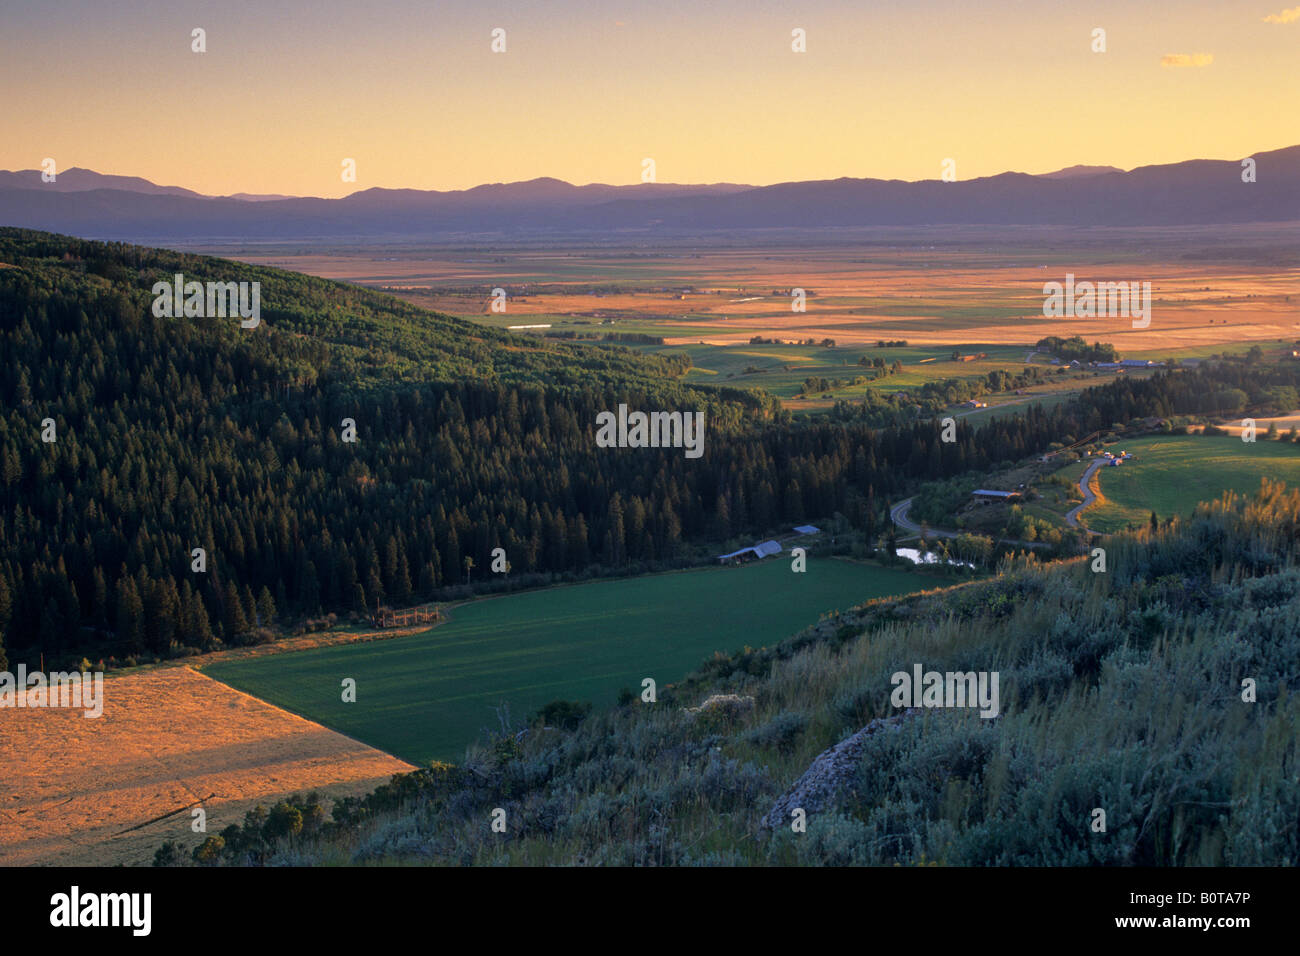 Sunset over the Driggs Victor Valley Idaho from the west slope of the Teton Range Targhee NF WYOMING Stock Photo